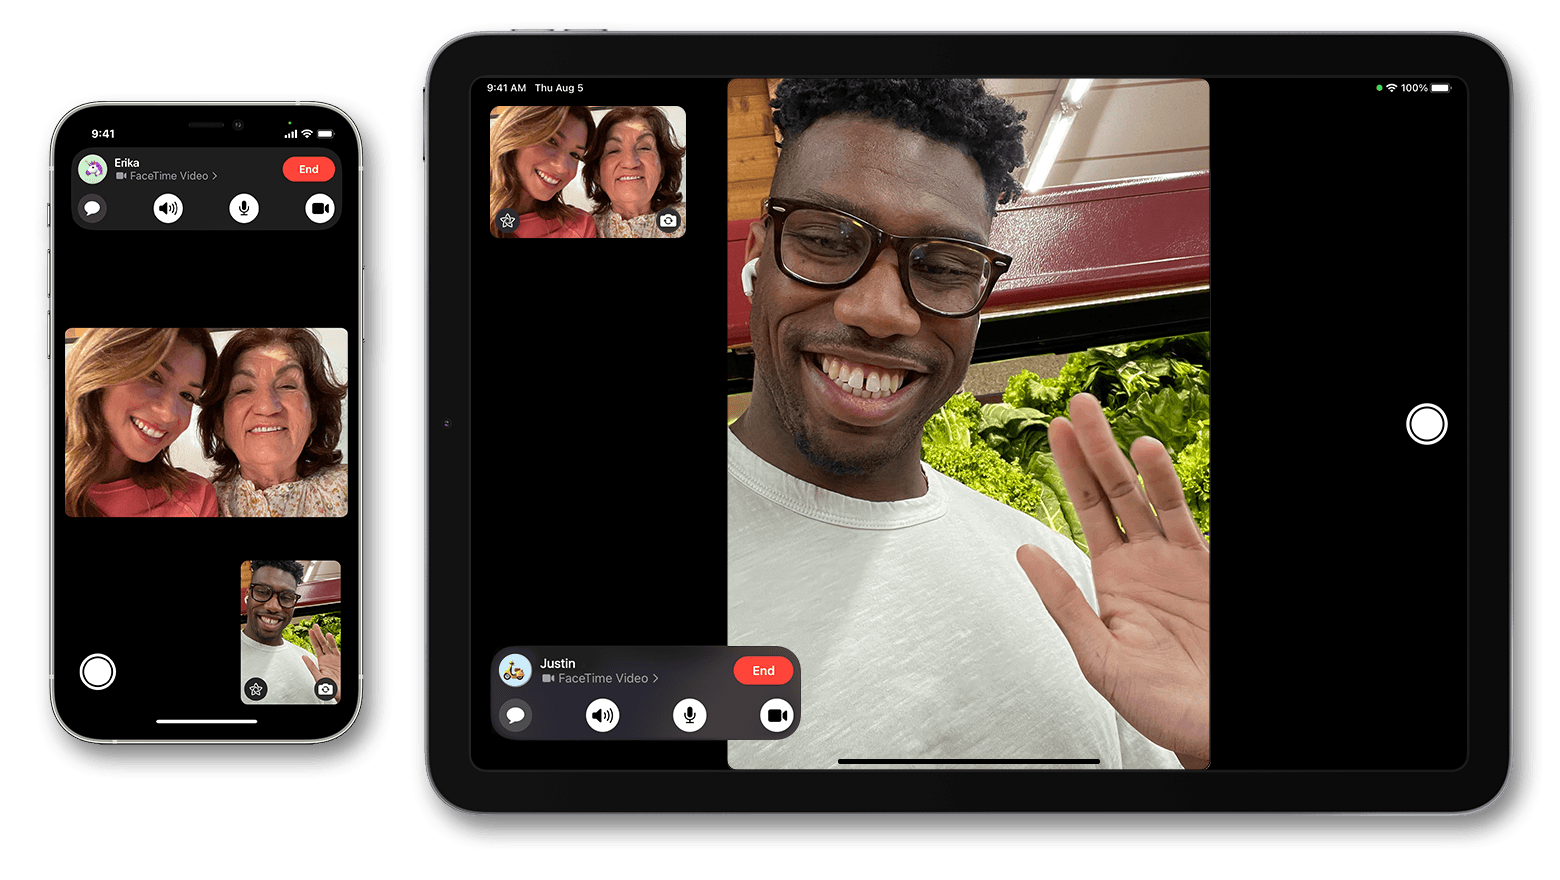 Use FaceTime with your iPhone, iPad or iPod touch